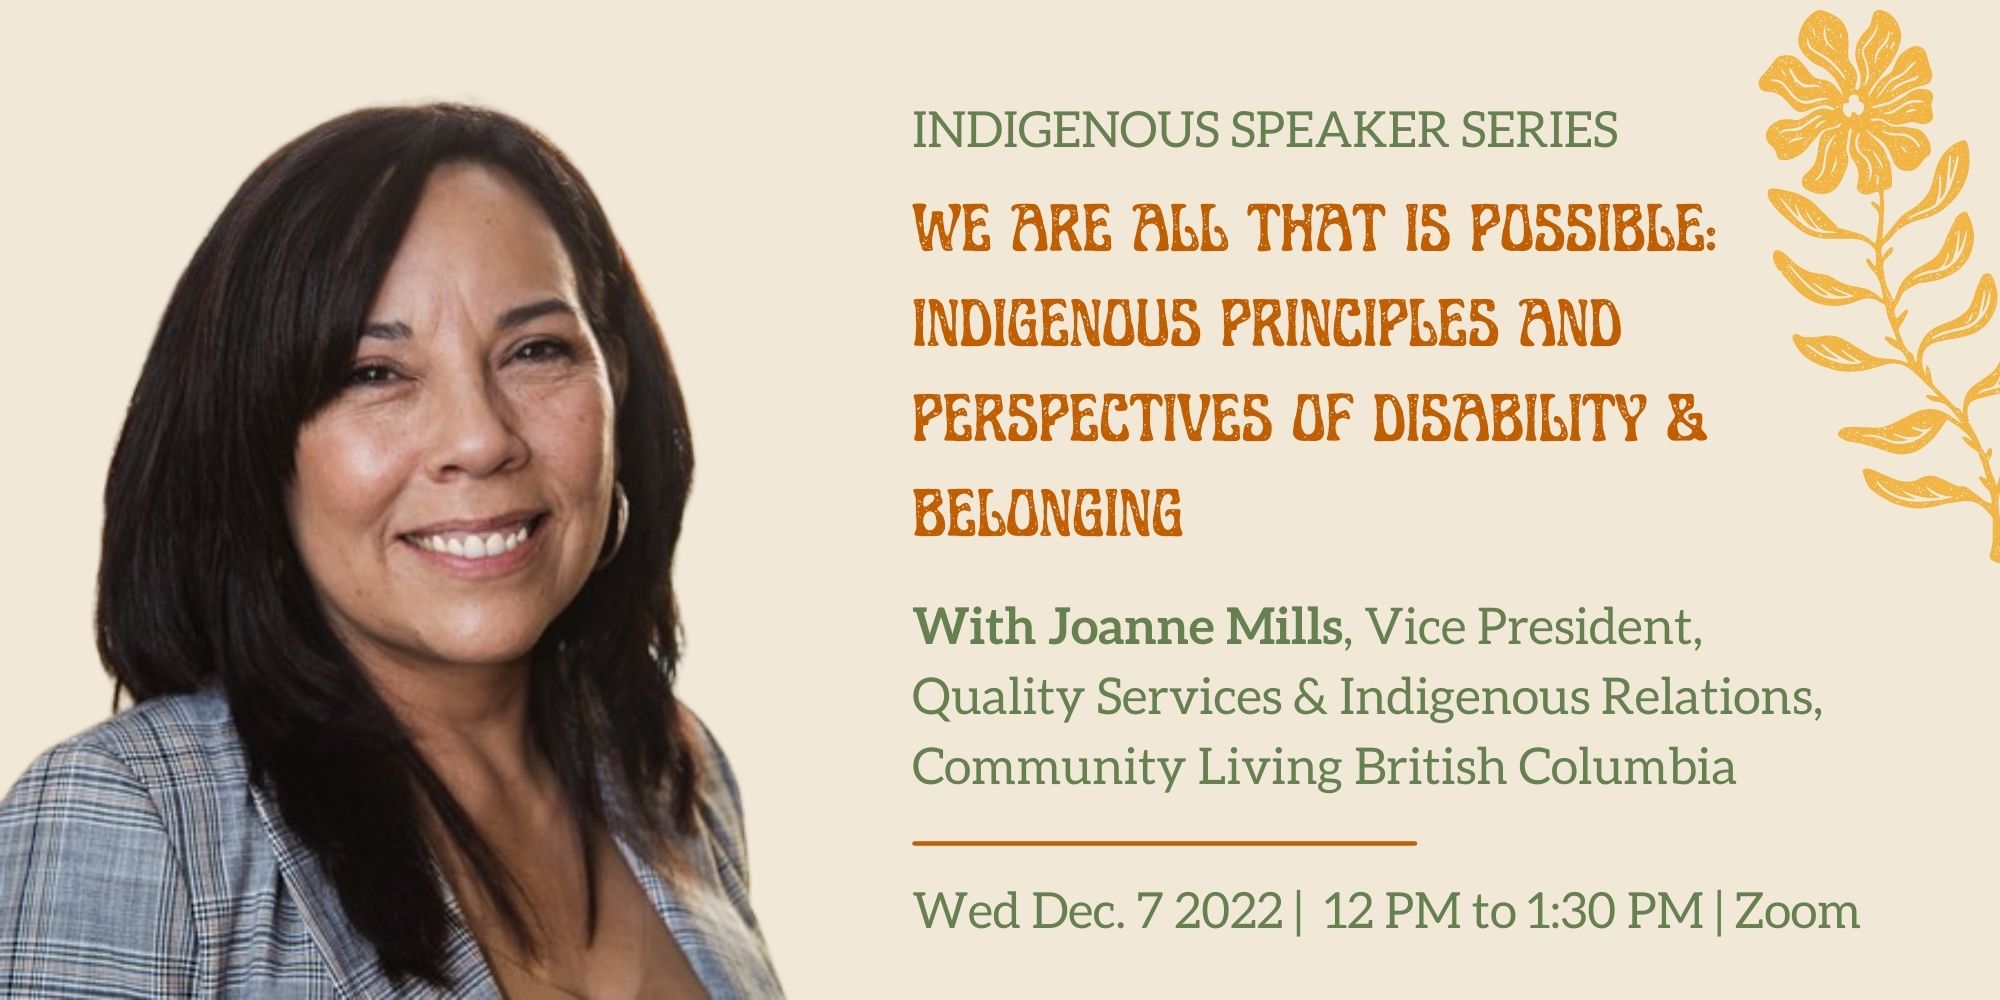 The Faculty of Medicine REDI Office Indigenous Speaker Series presents: “We Are All That Is Possible: Indigenous Principles and Perspectives of Disability & Belonging.”